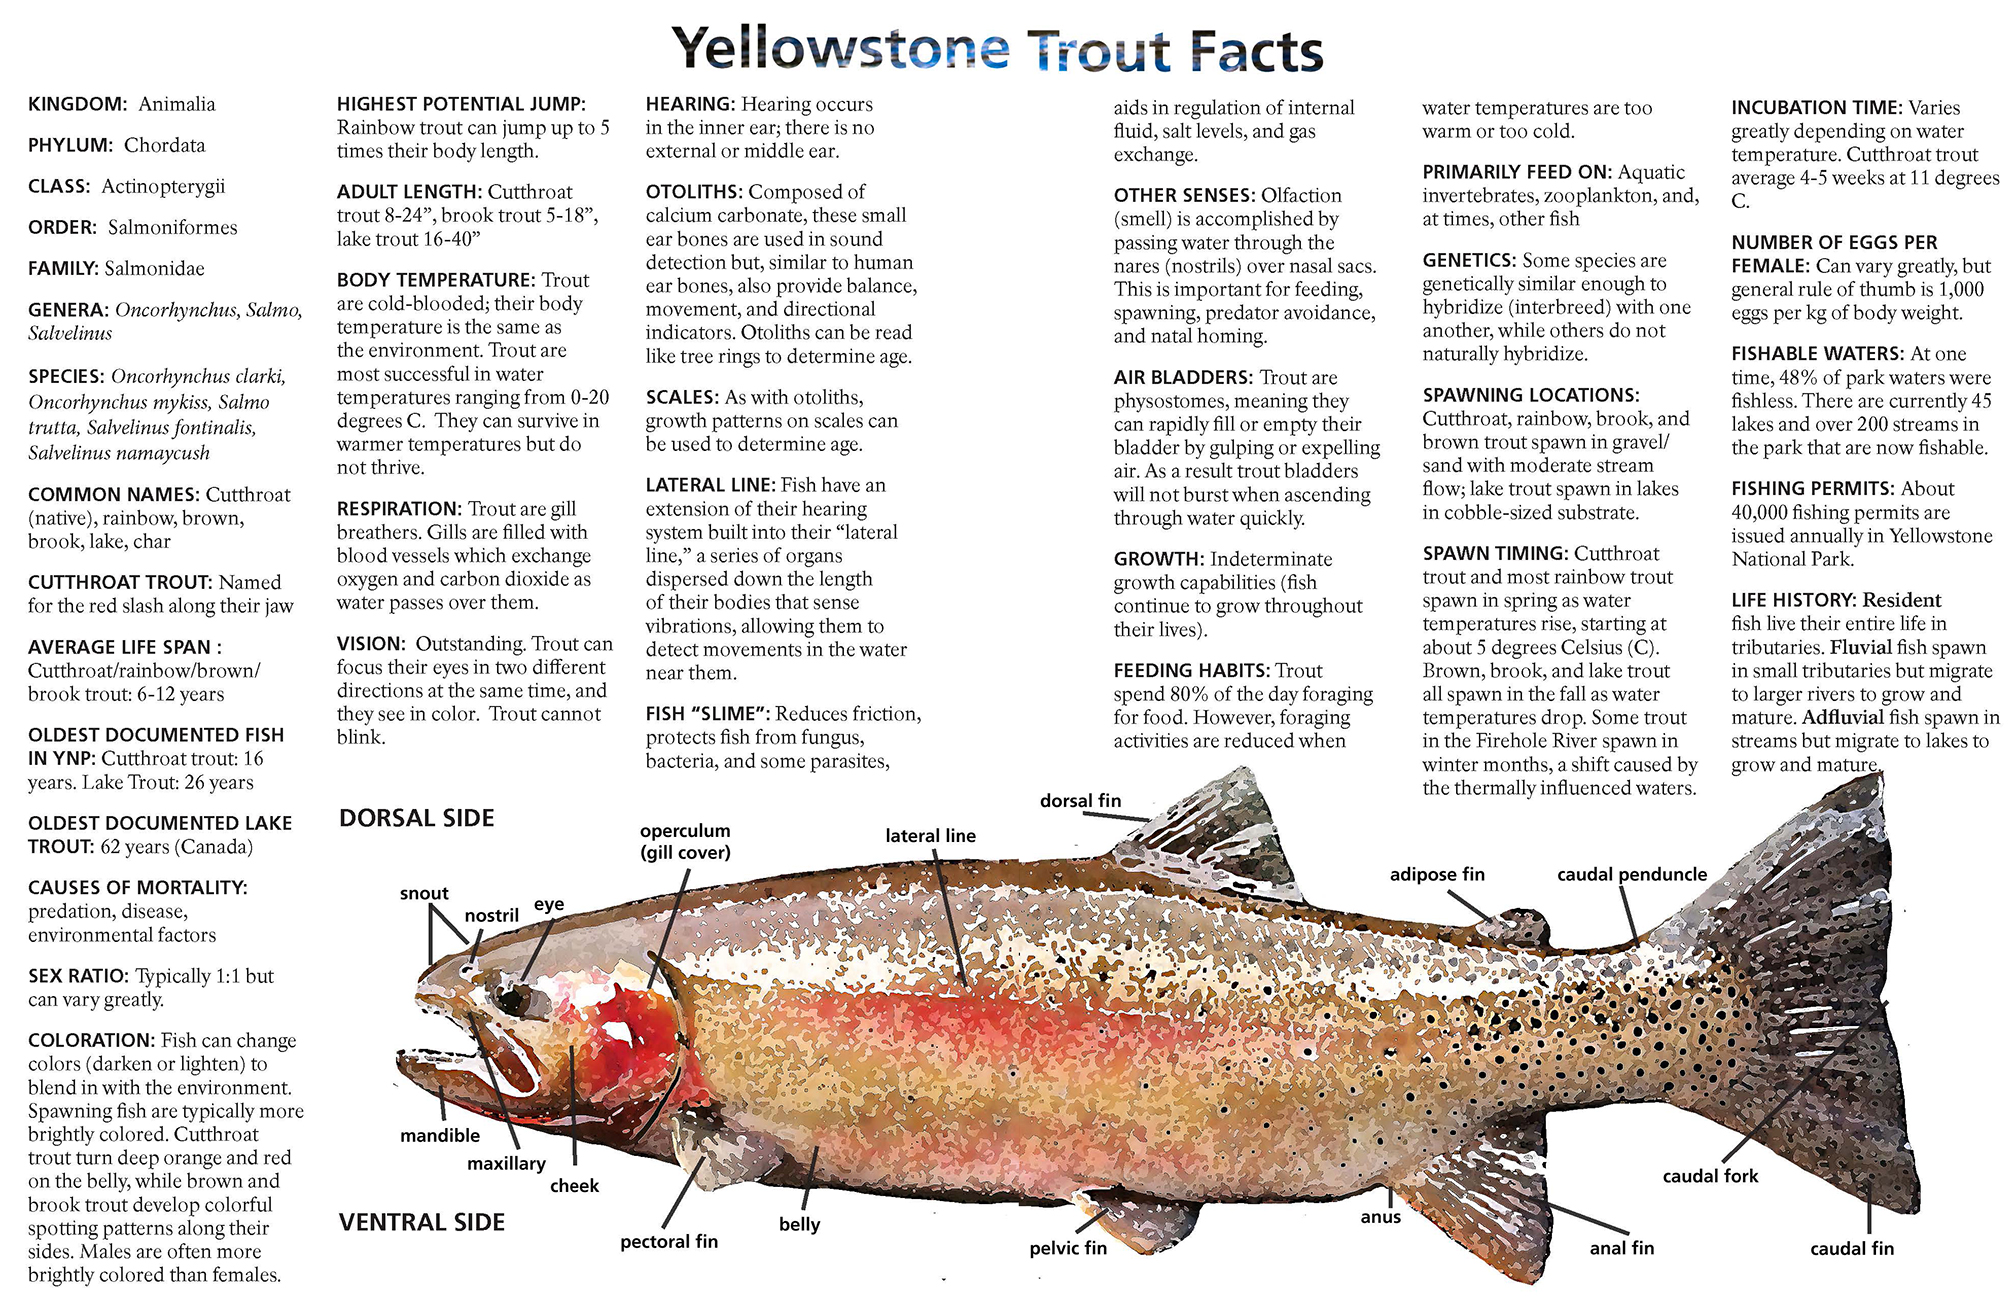 https://www.nps.gov/images/TROUT-FACTS-IMAGE.jpg